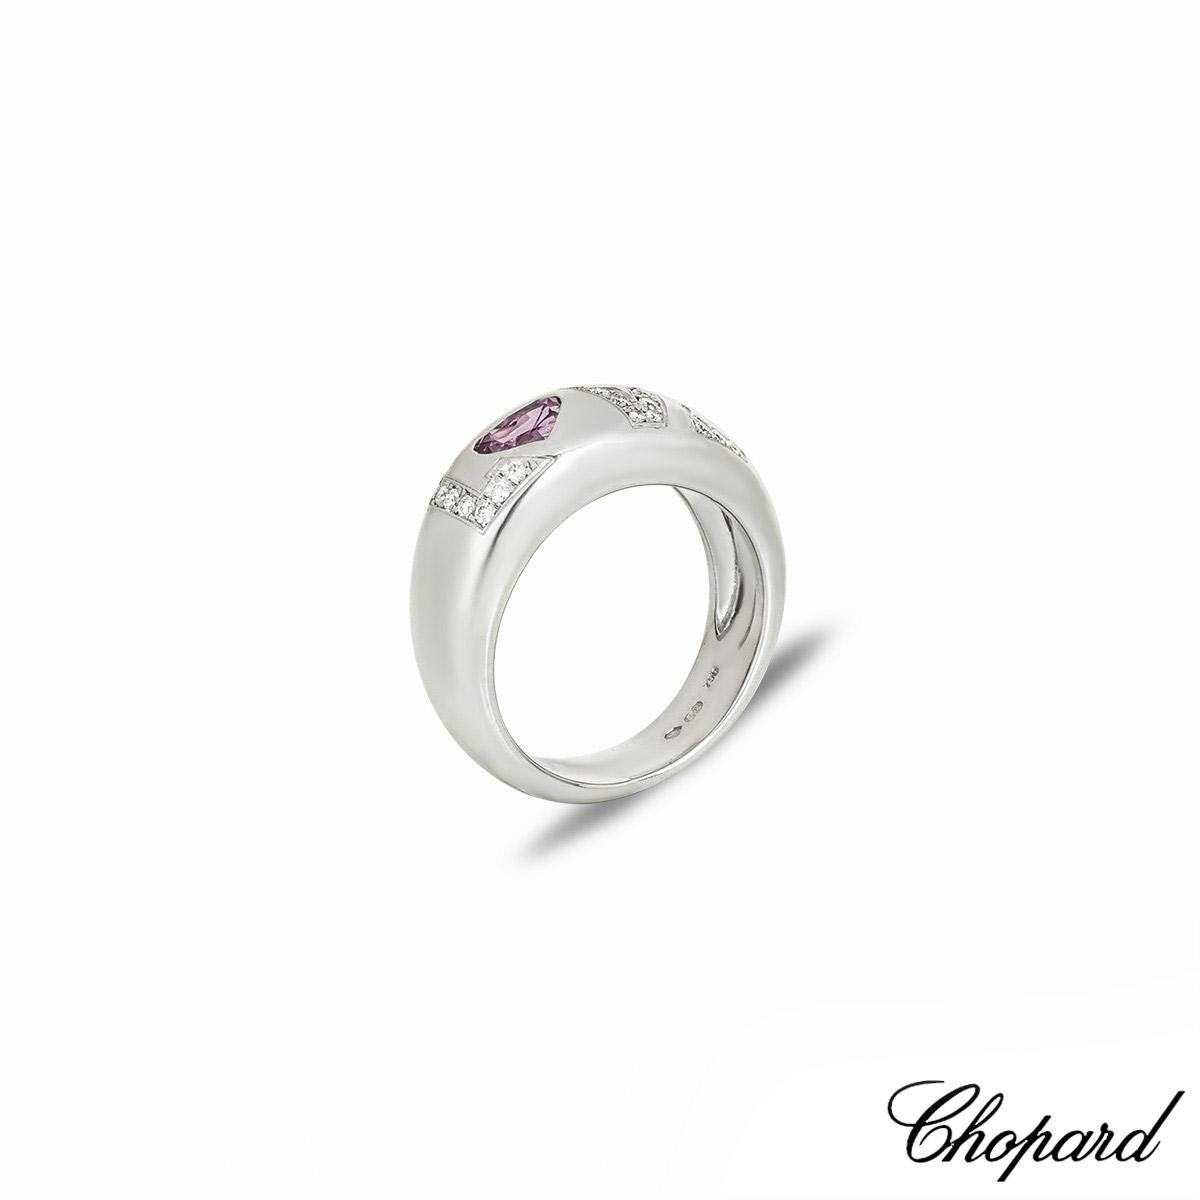 A beautiful 18k white gold pink sapphire and diamond 'Love' ring by Chopard. The ring features the word 'Love' spelt out with a heart shaped pink sapphire as the 'O' and  28 round brilliant cut diamonds totalling approximately 0.24ct, F-G colour and